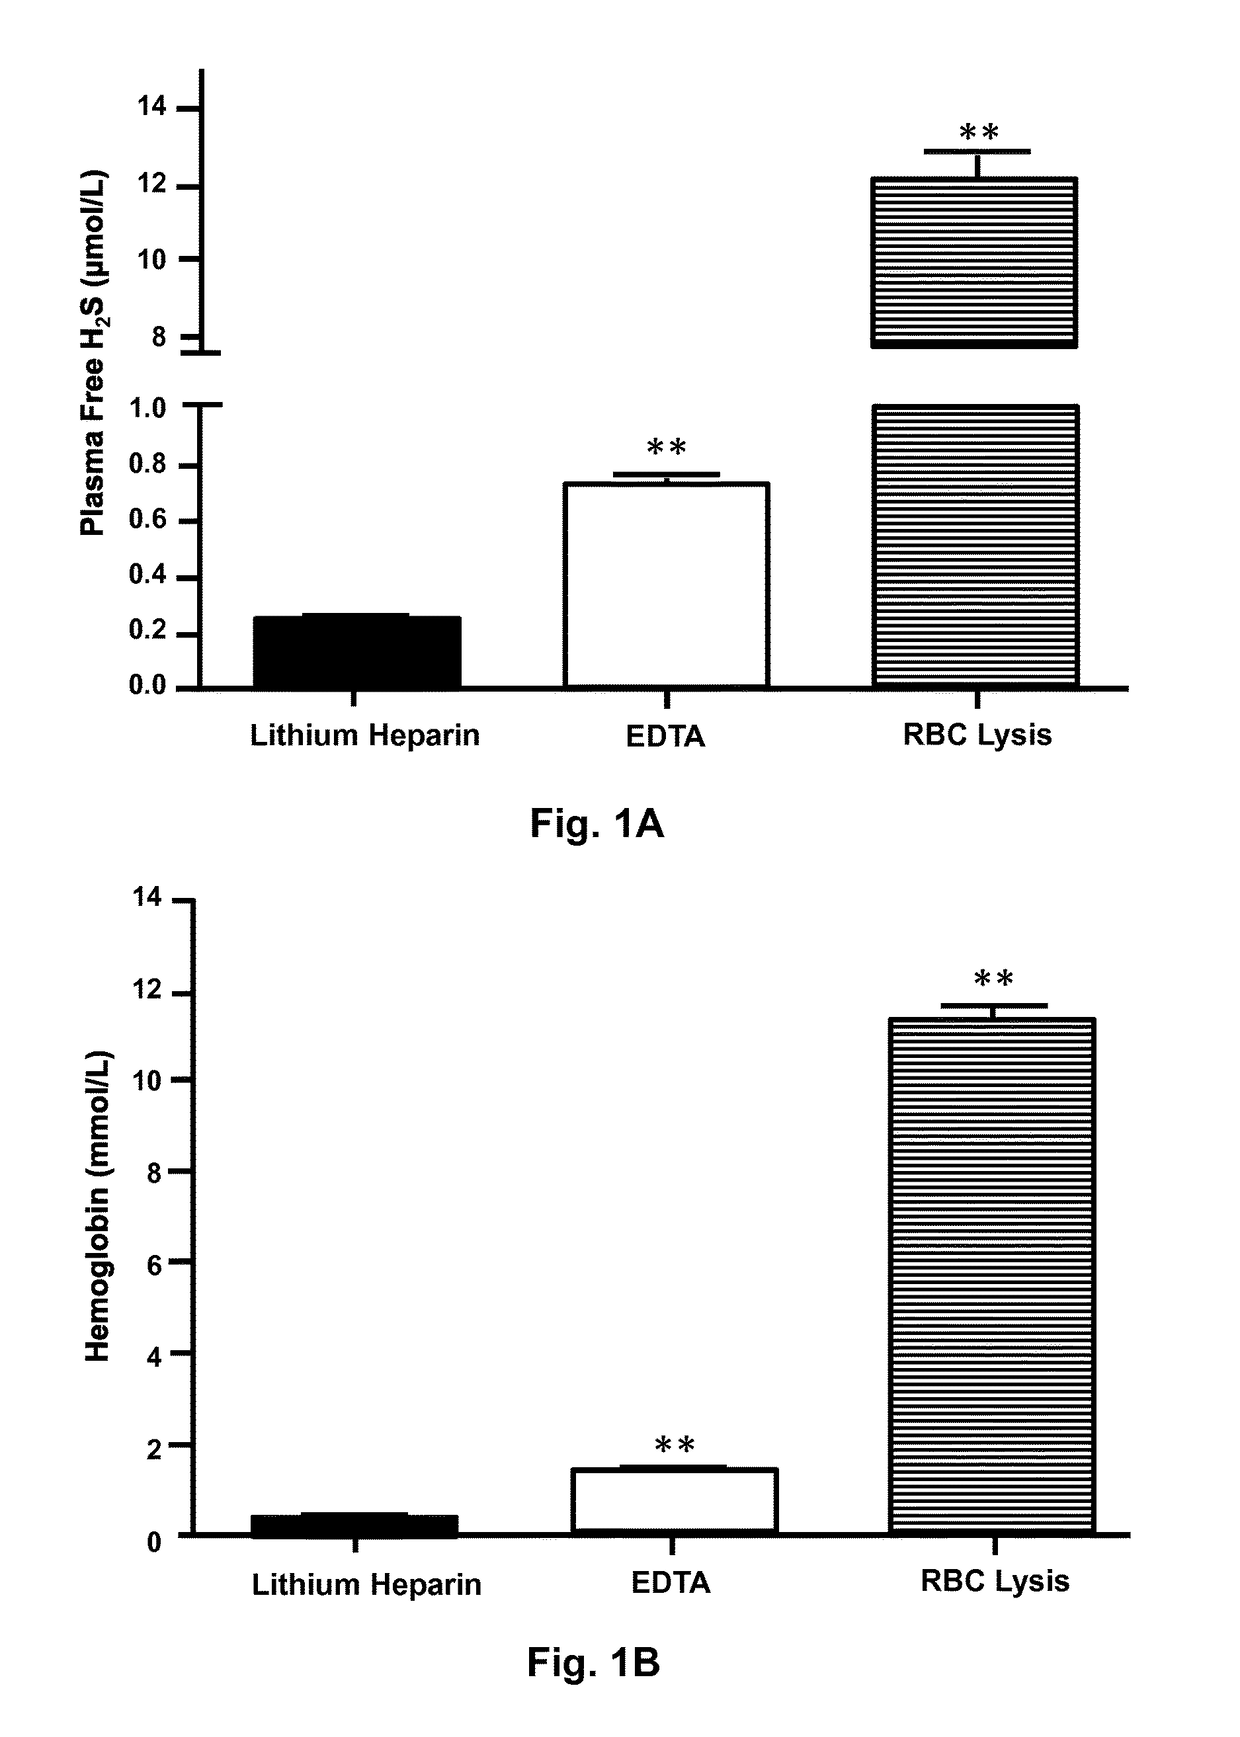 Plasma H<sub>2</sub>S levels as biomarkers for vascular disease